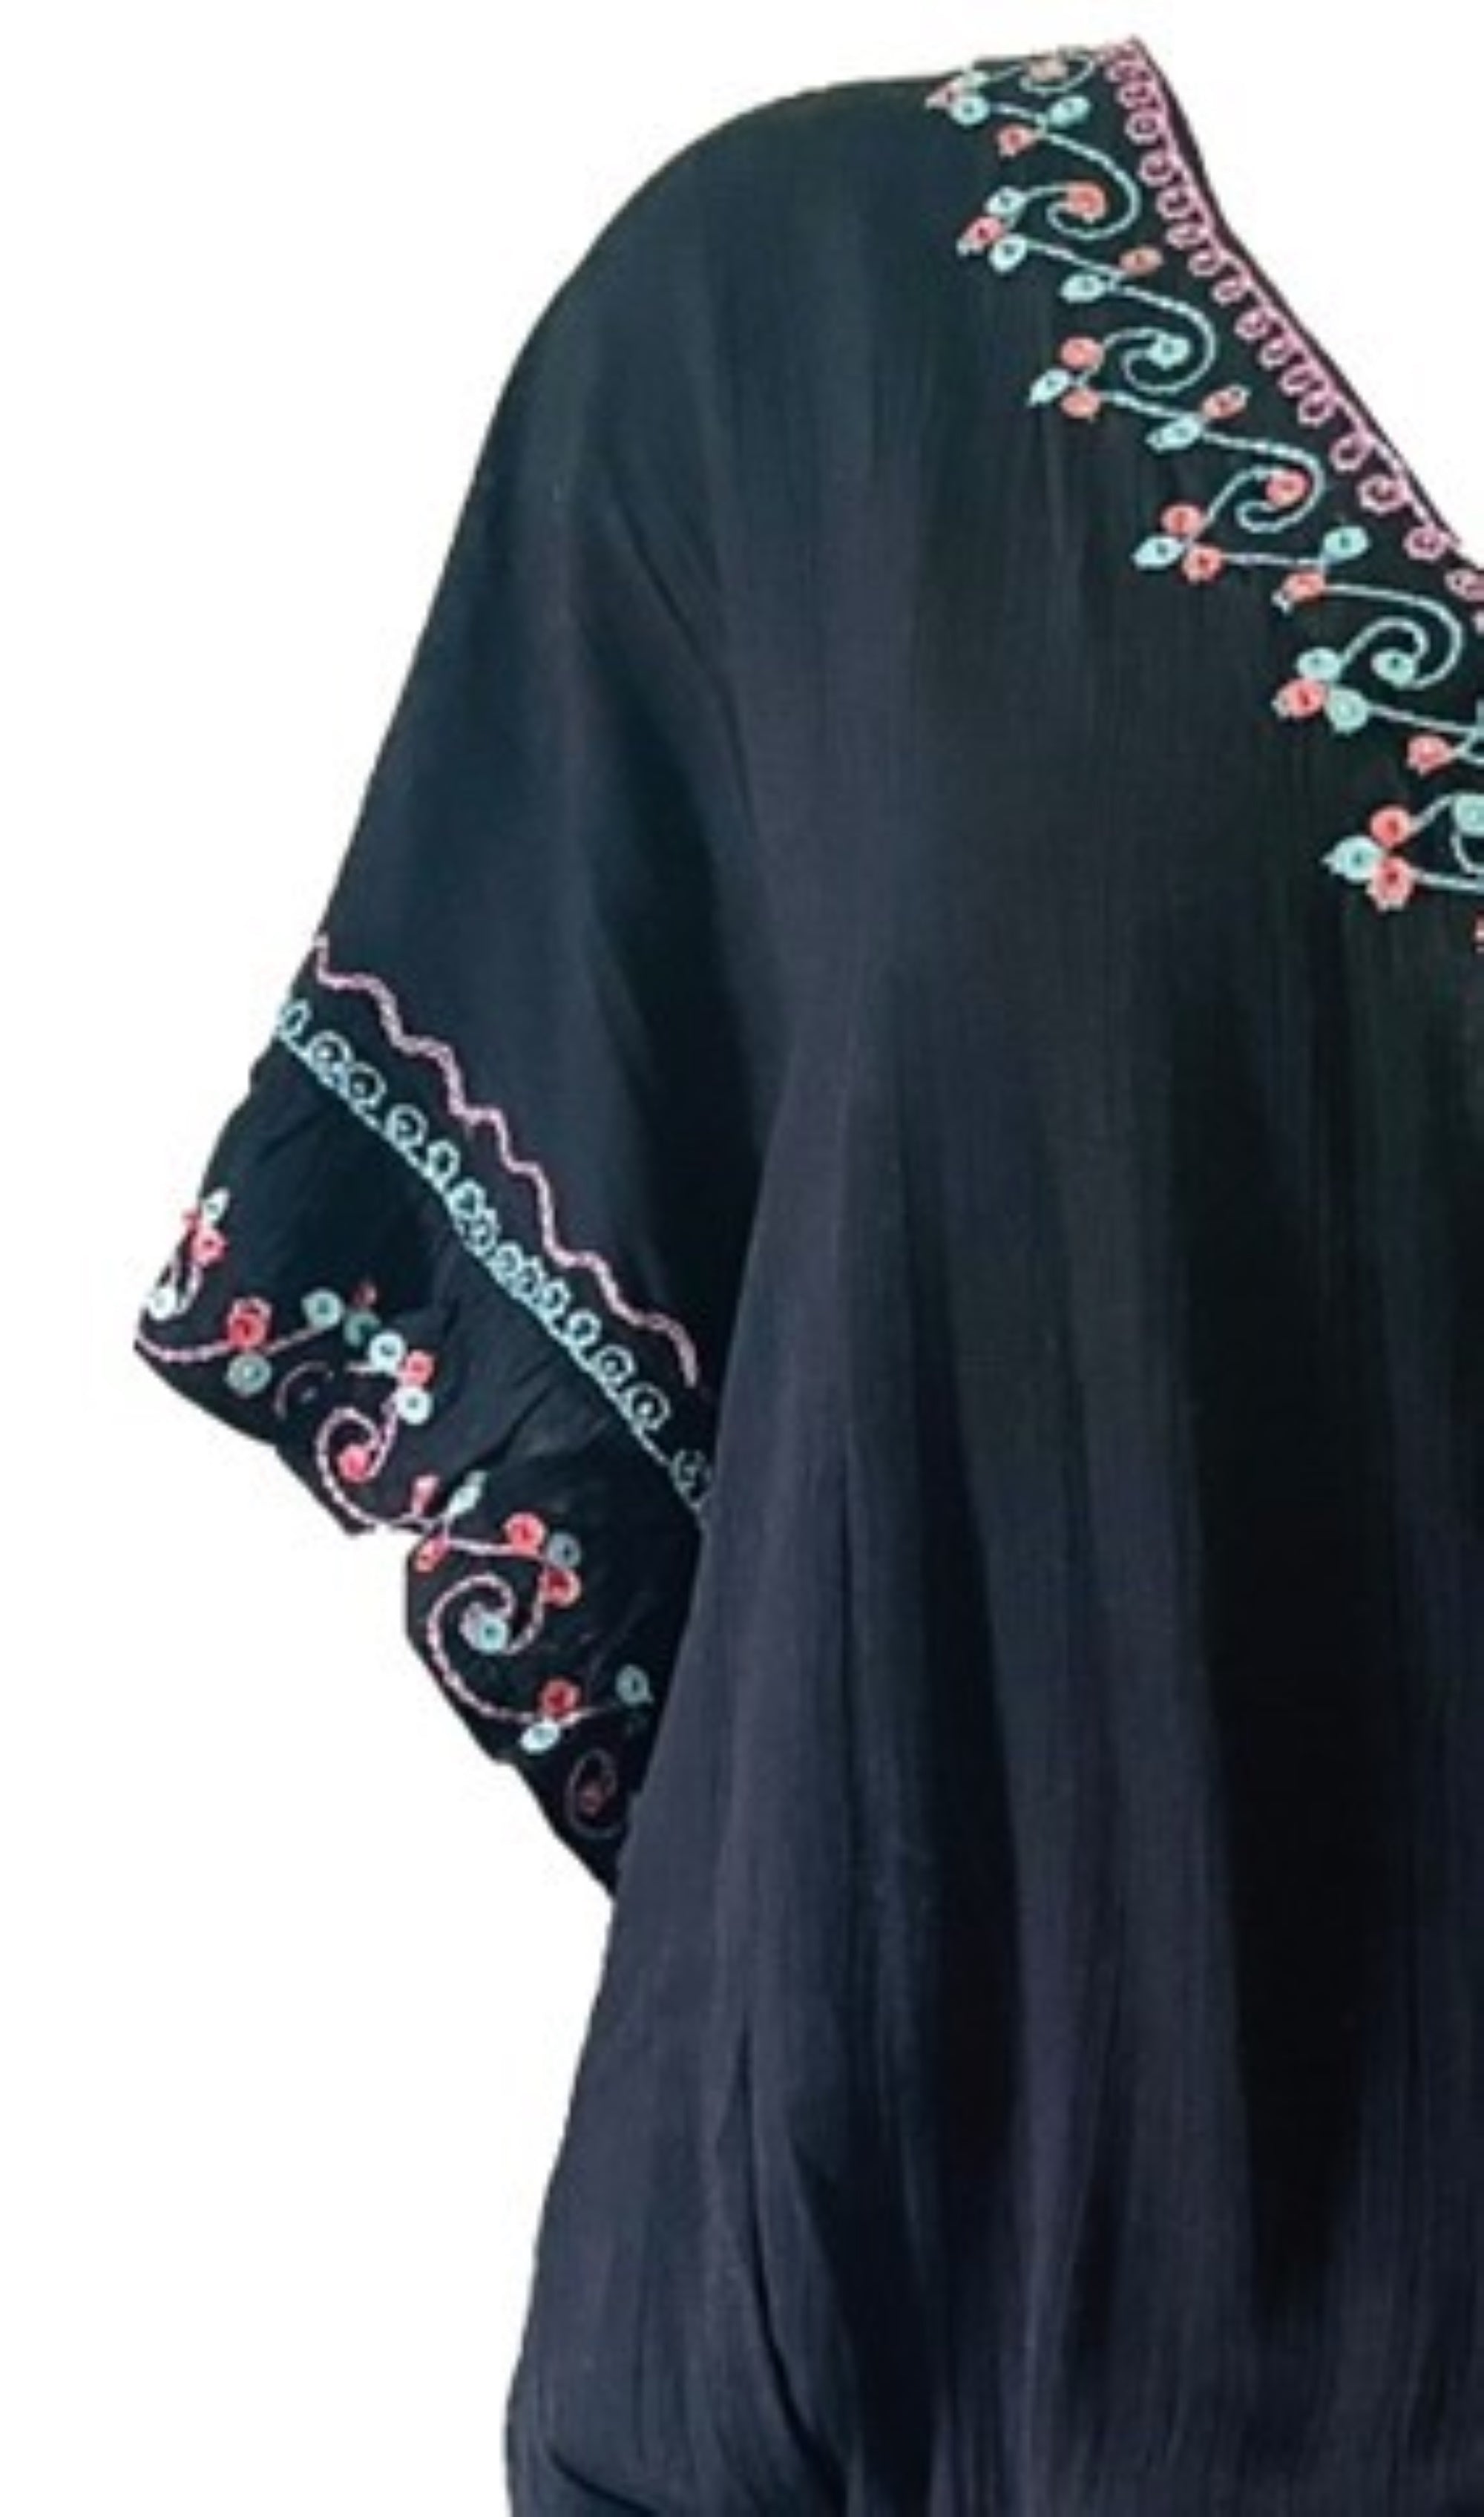 Black cotton kaftan dress to wear on holiday by Lindsey Brown 